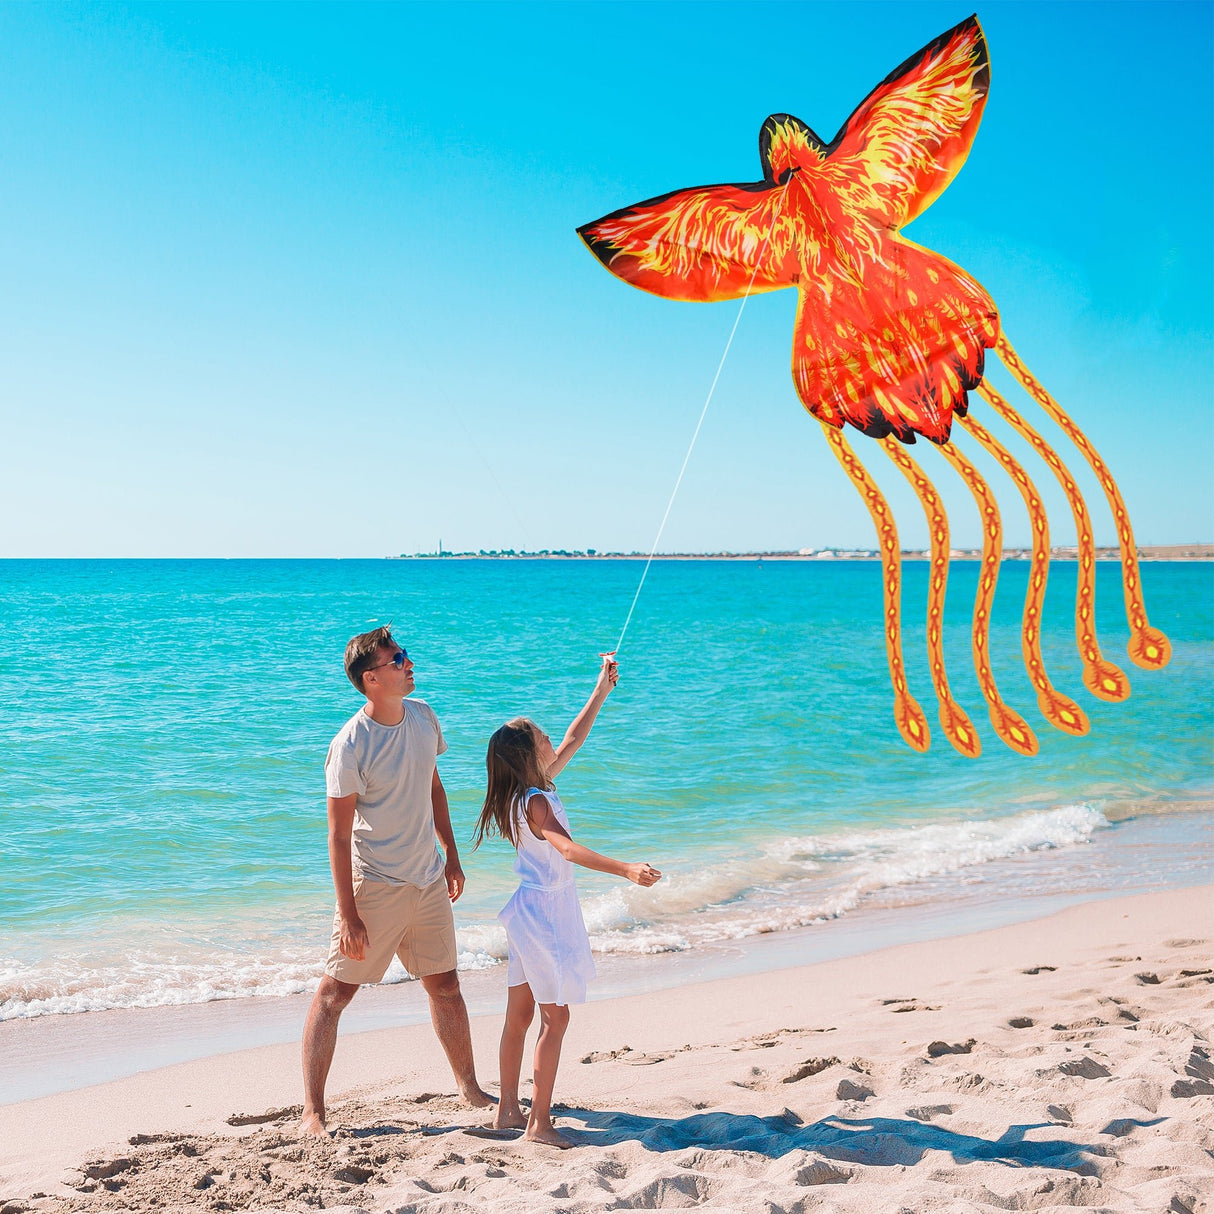 JEKOSEN Phoenix Huge Kite 6 tails Easy to Fly Suitable for Children and Adults Travel Beach Park Outdoor Activities - GexWorldwide